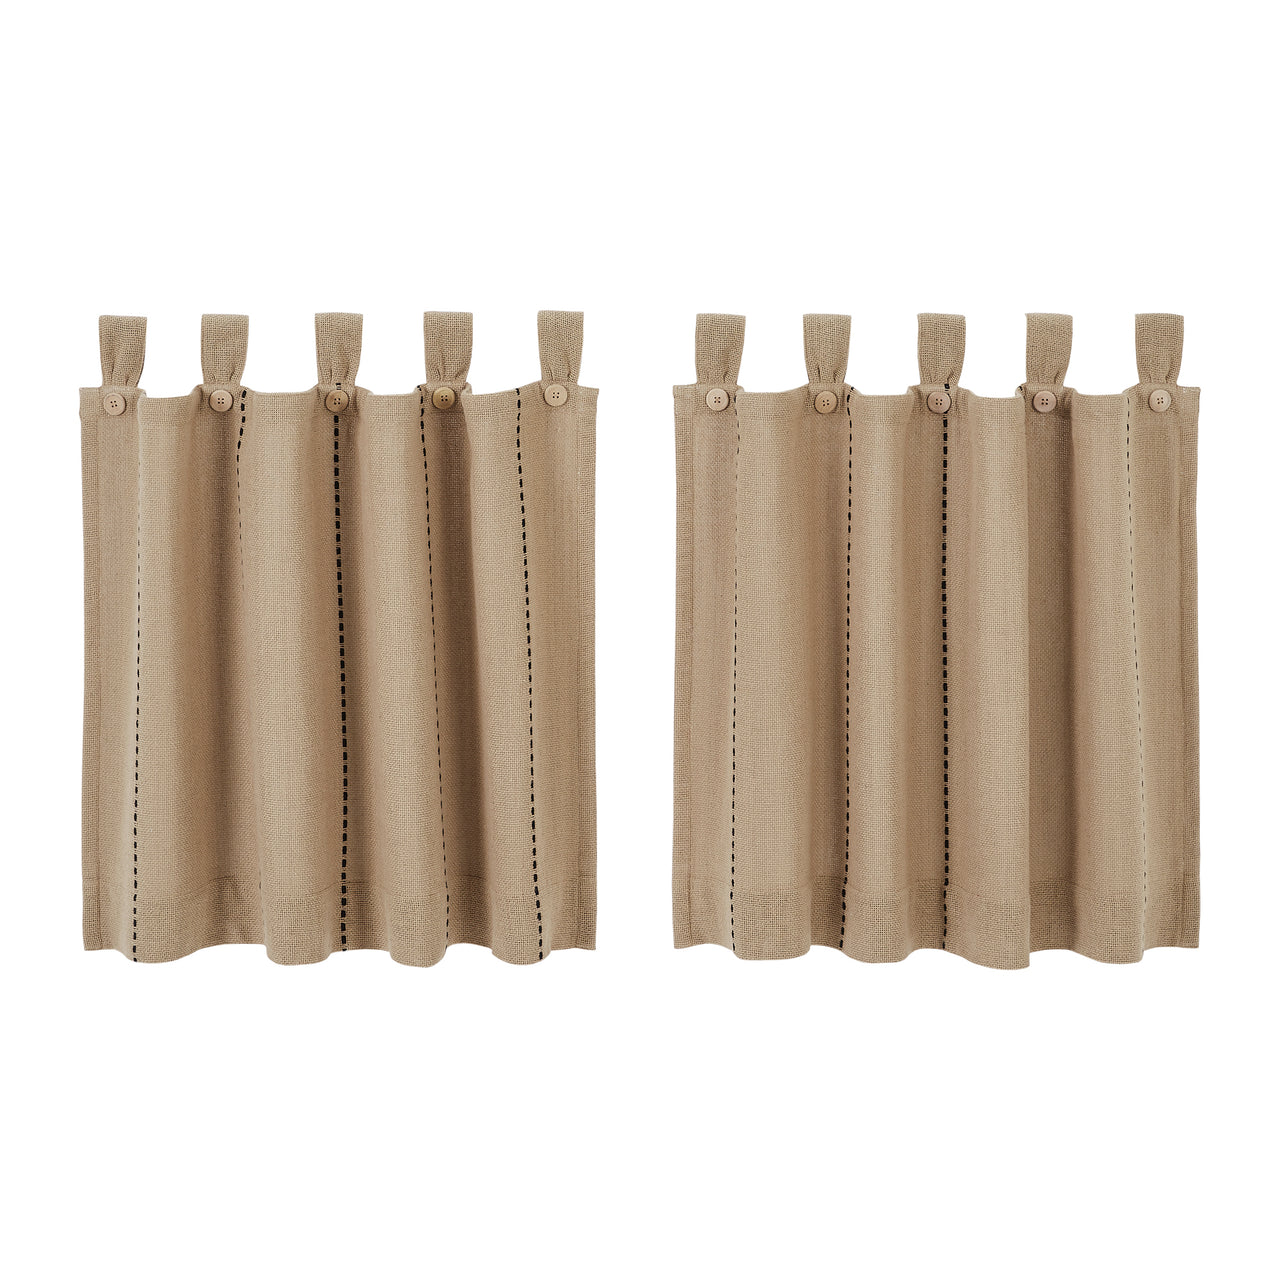 Stitched Burlap Natural Tier Curtain Set of 2 L24xW36